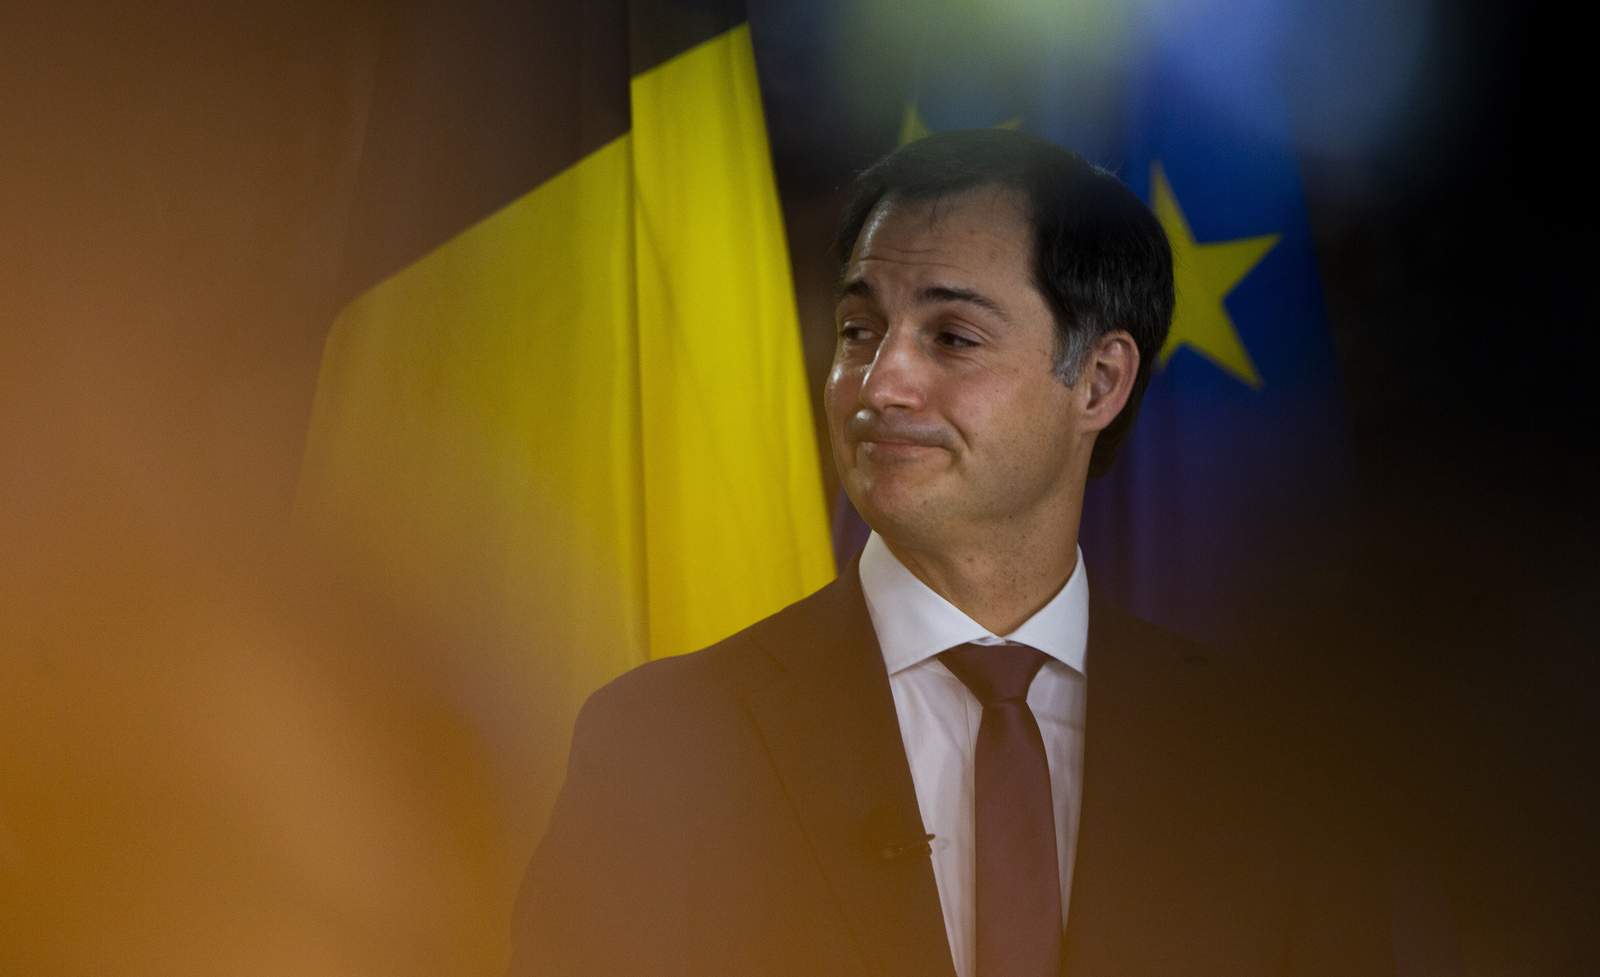 7 parties agree on Belgian government led by Liberal De Croo